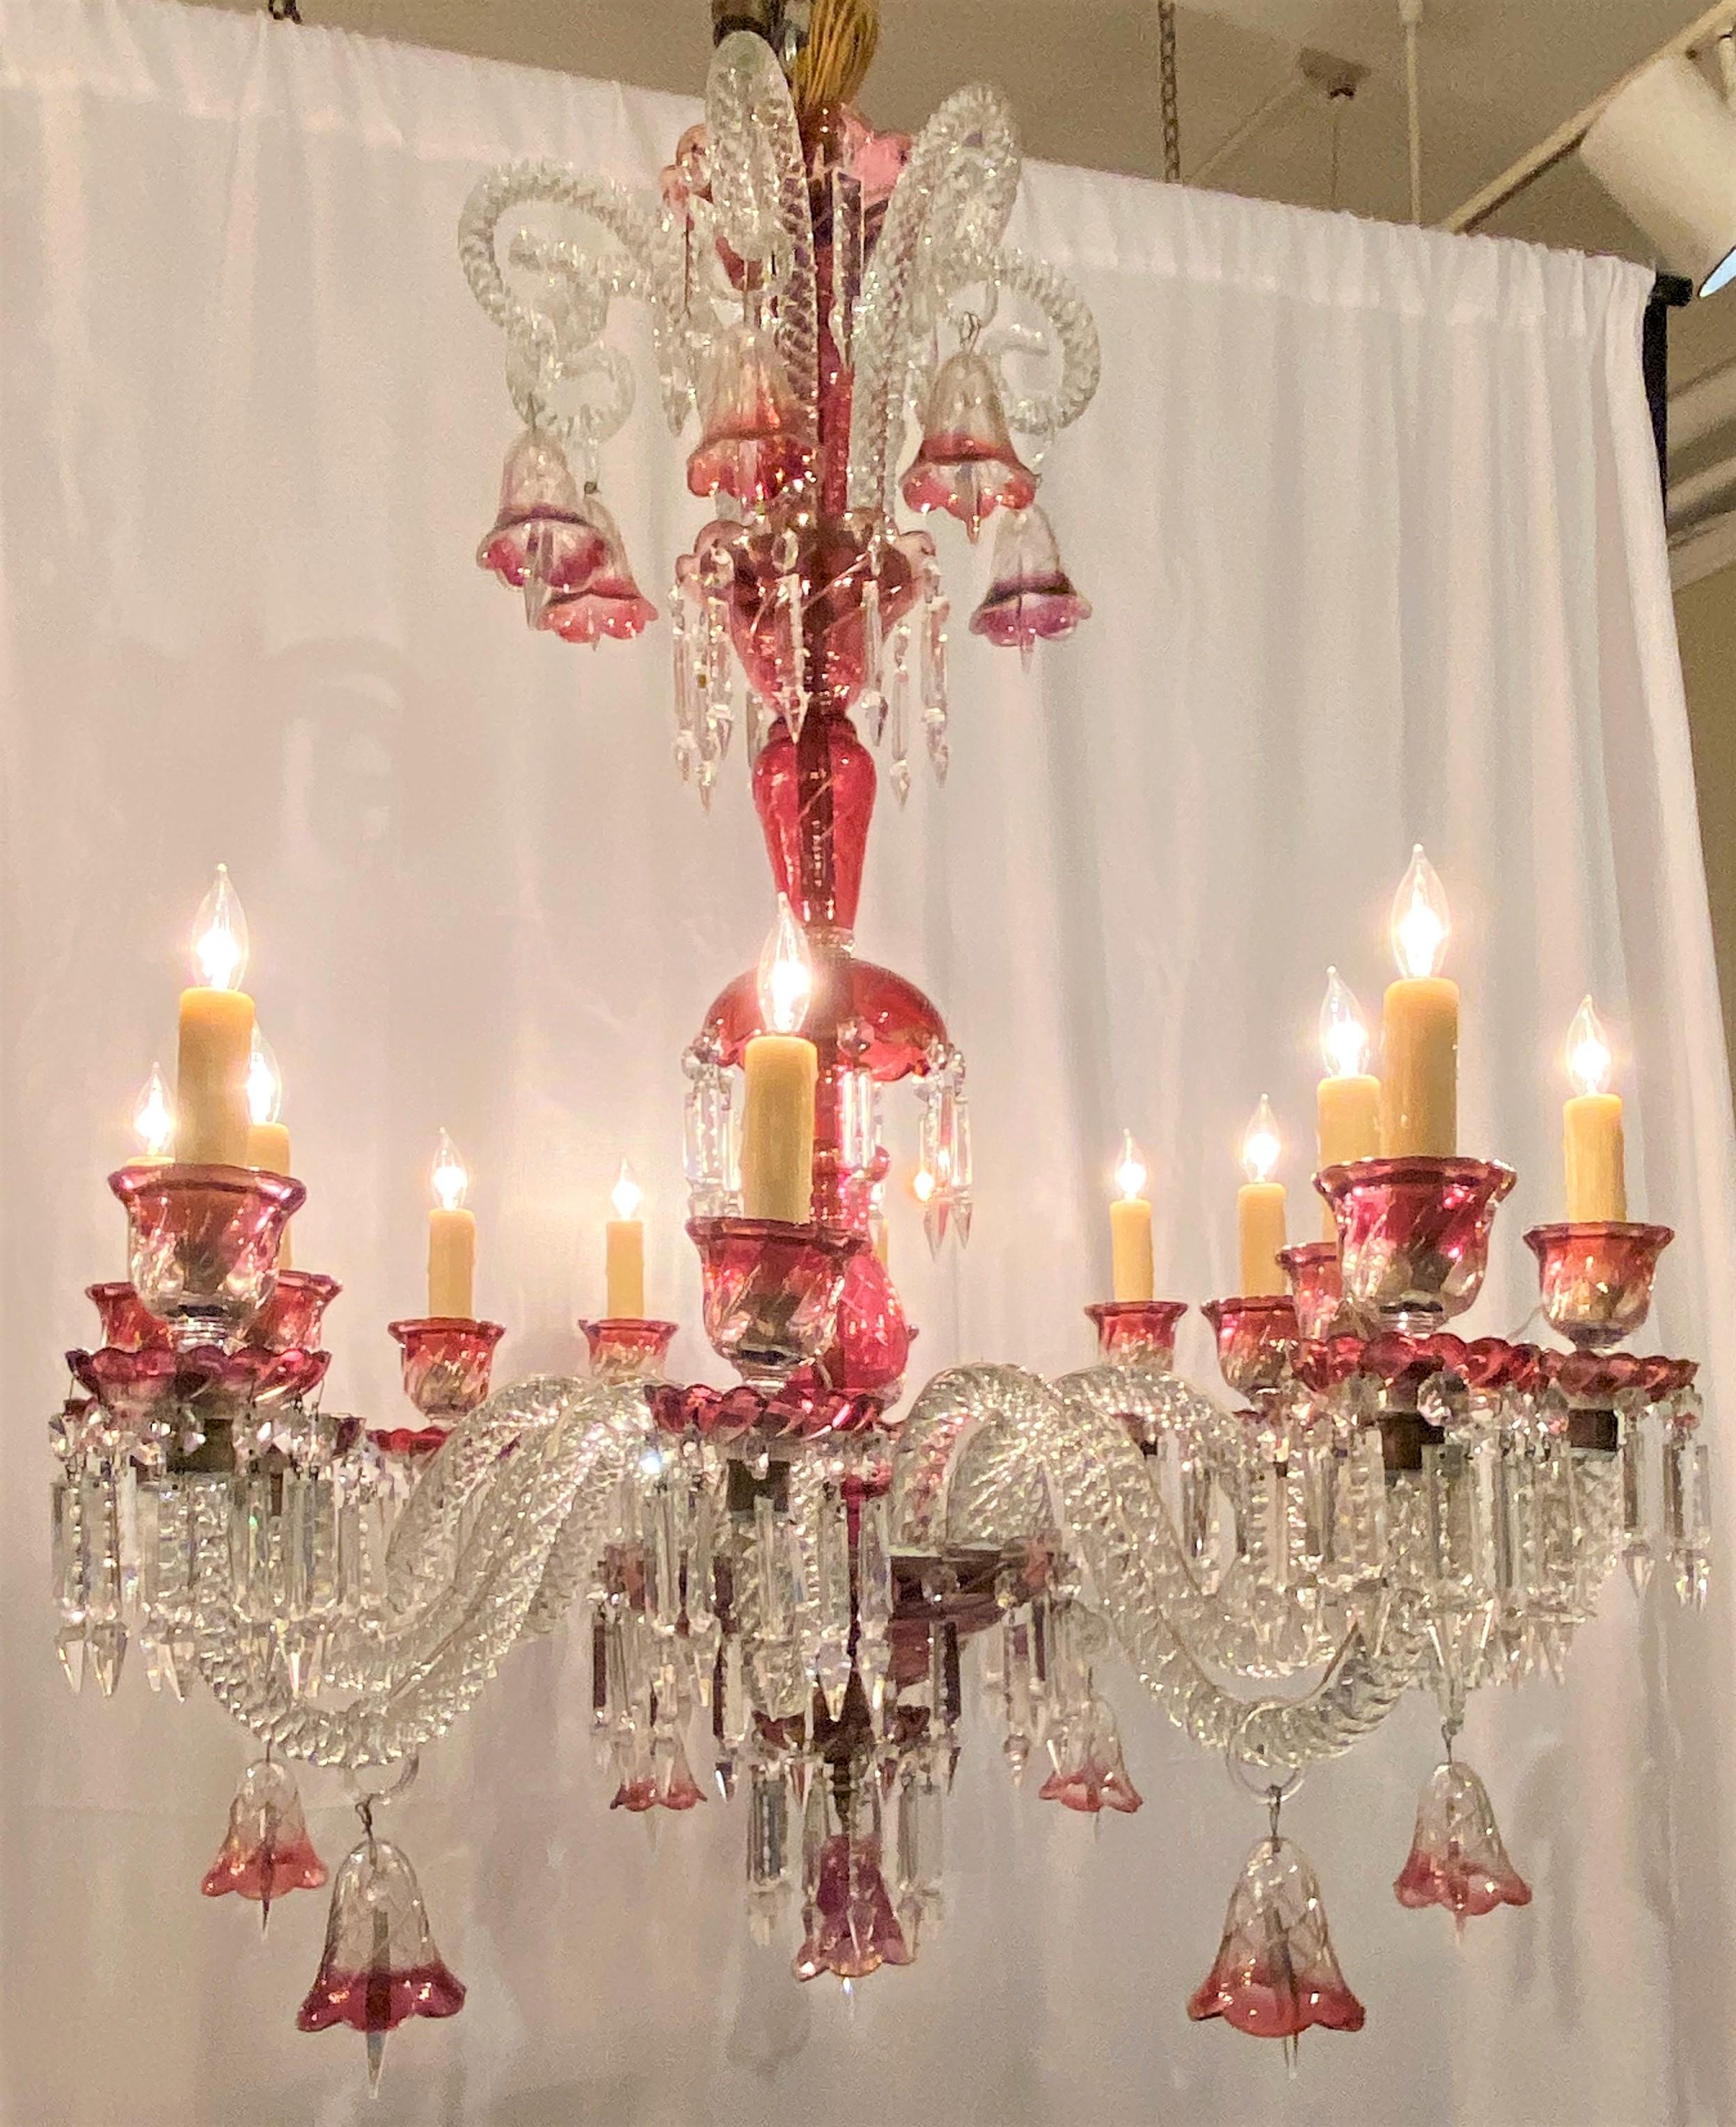 Antique French belle epoch baccarat cranberry red crystal 12-light chandelier, circa 1880.
CHC302.